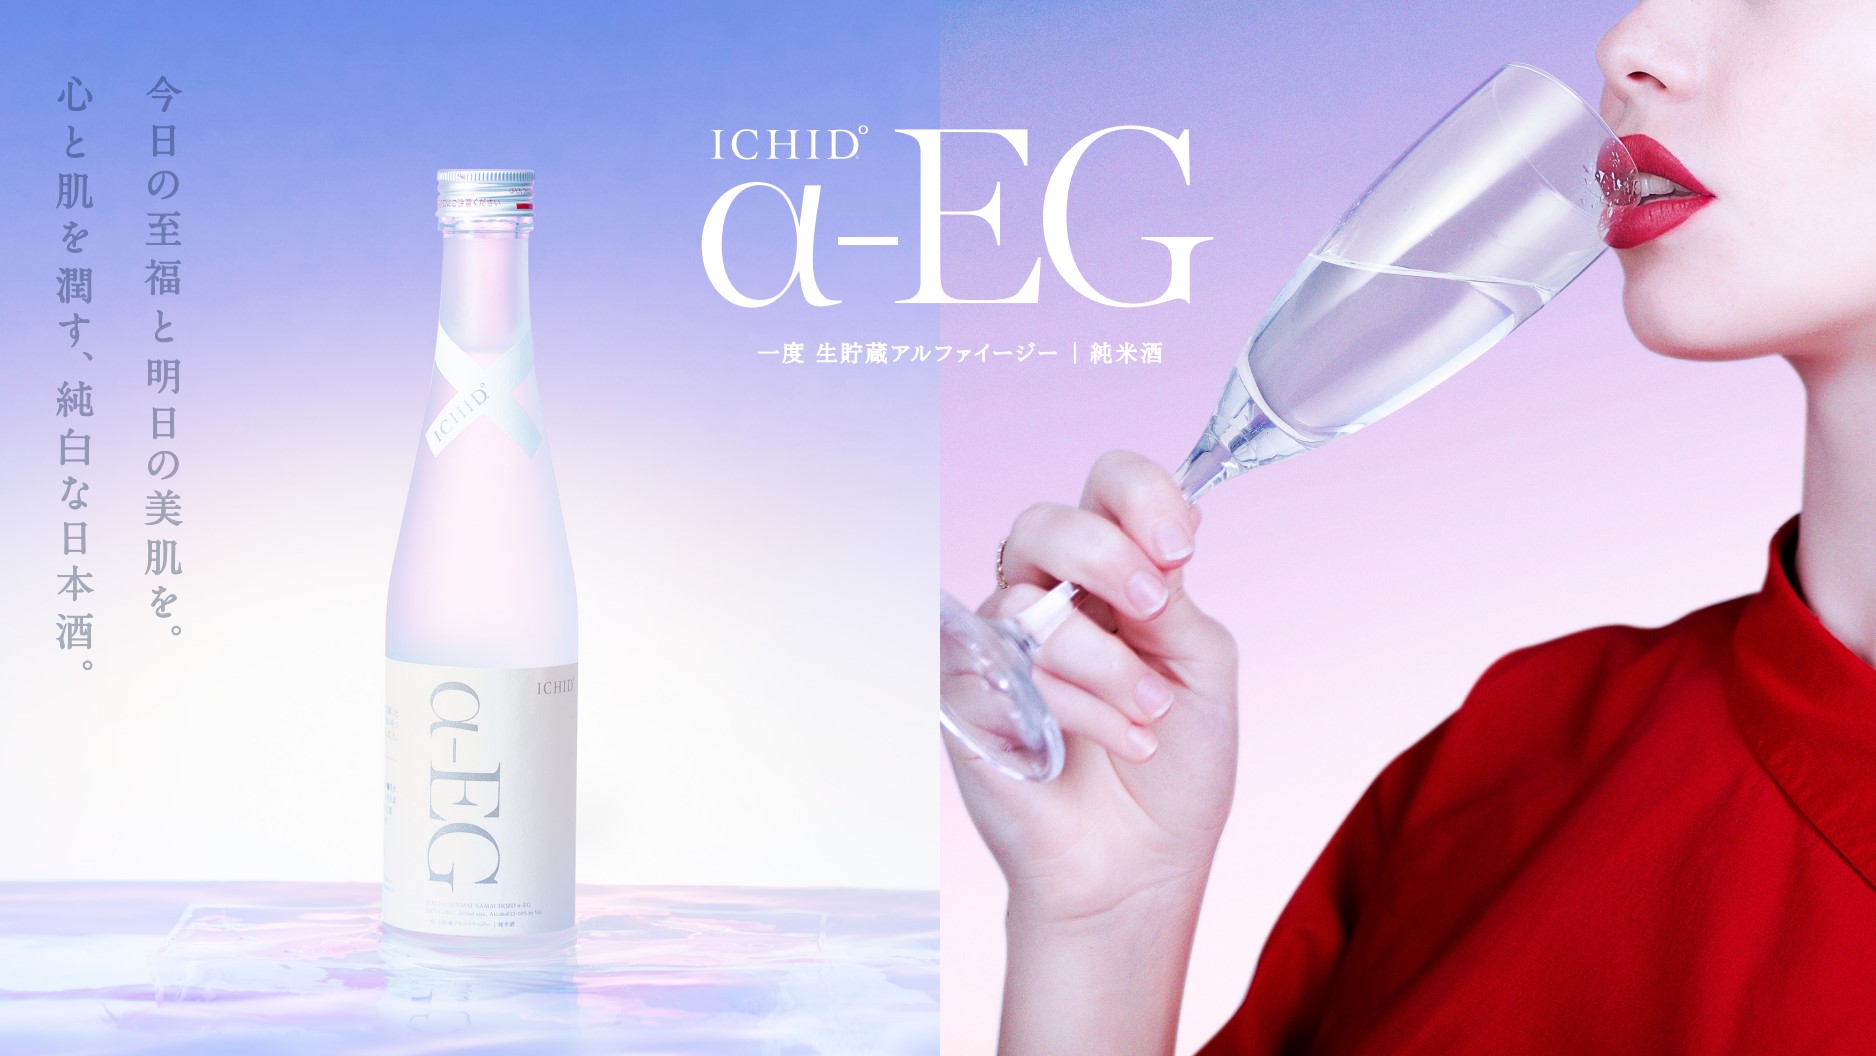 JAPANESE SAKE ICHIDO alpha-EG 300ml  [alpha-EG] is for beauty that has been proven to [increase the collagen density of the skin]